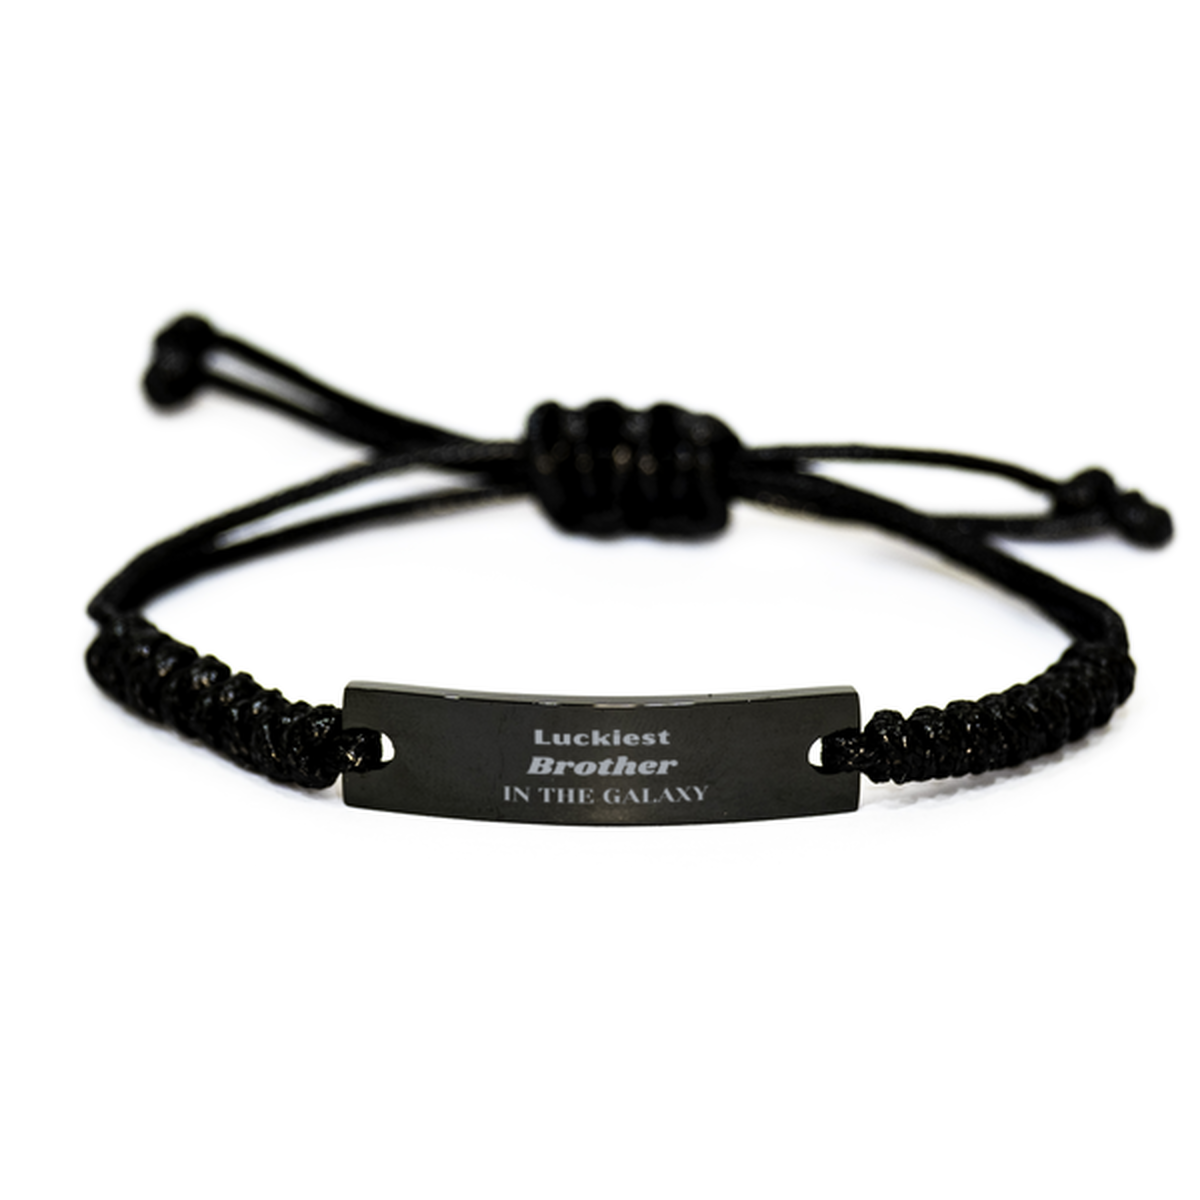 Luckiest Brother in the Galaxy, To My Brother Engraved Gifts, Christmas Brother Black Rope Bracelet Gifts, X-mas Birthday Unique Gifts For Brother Men Women